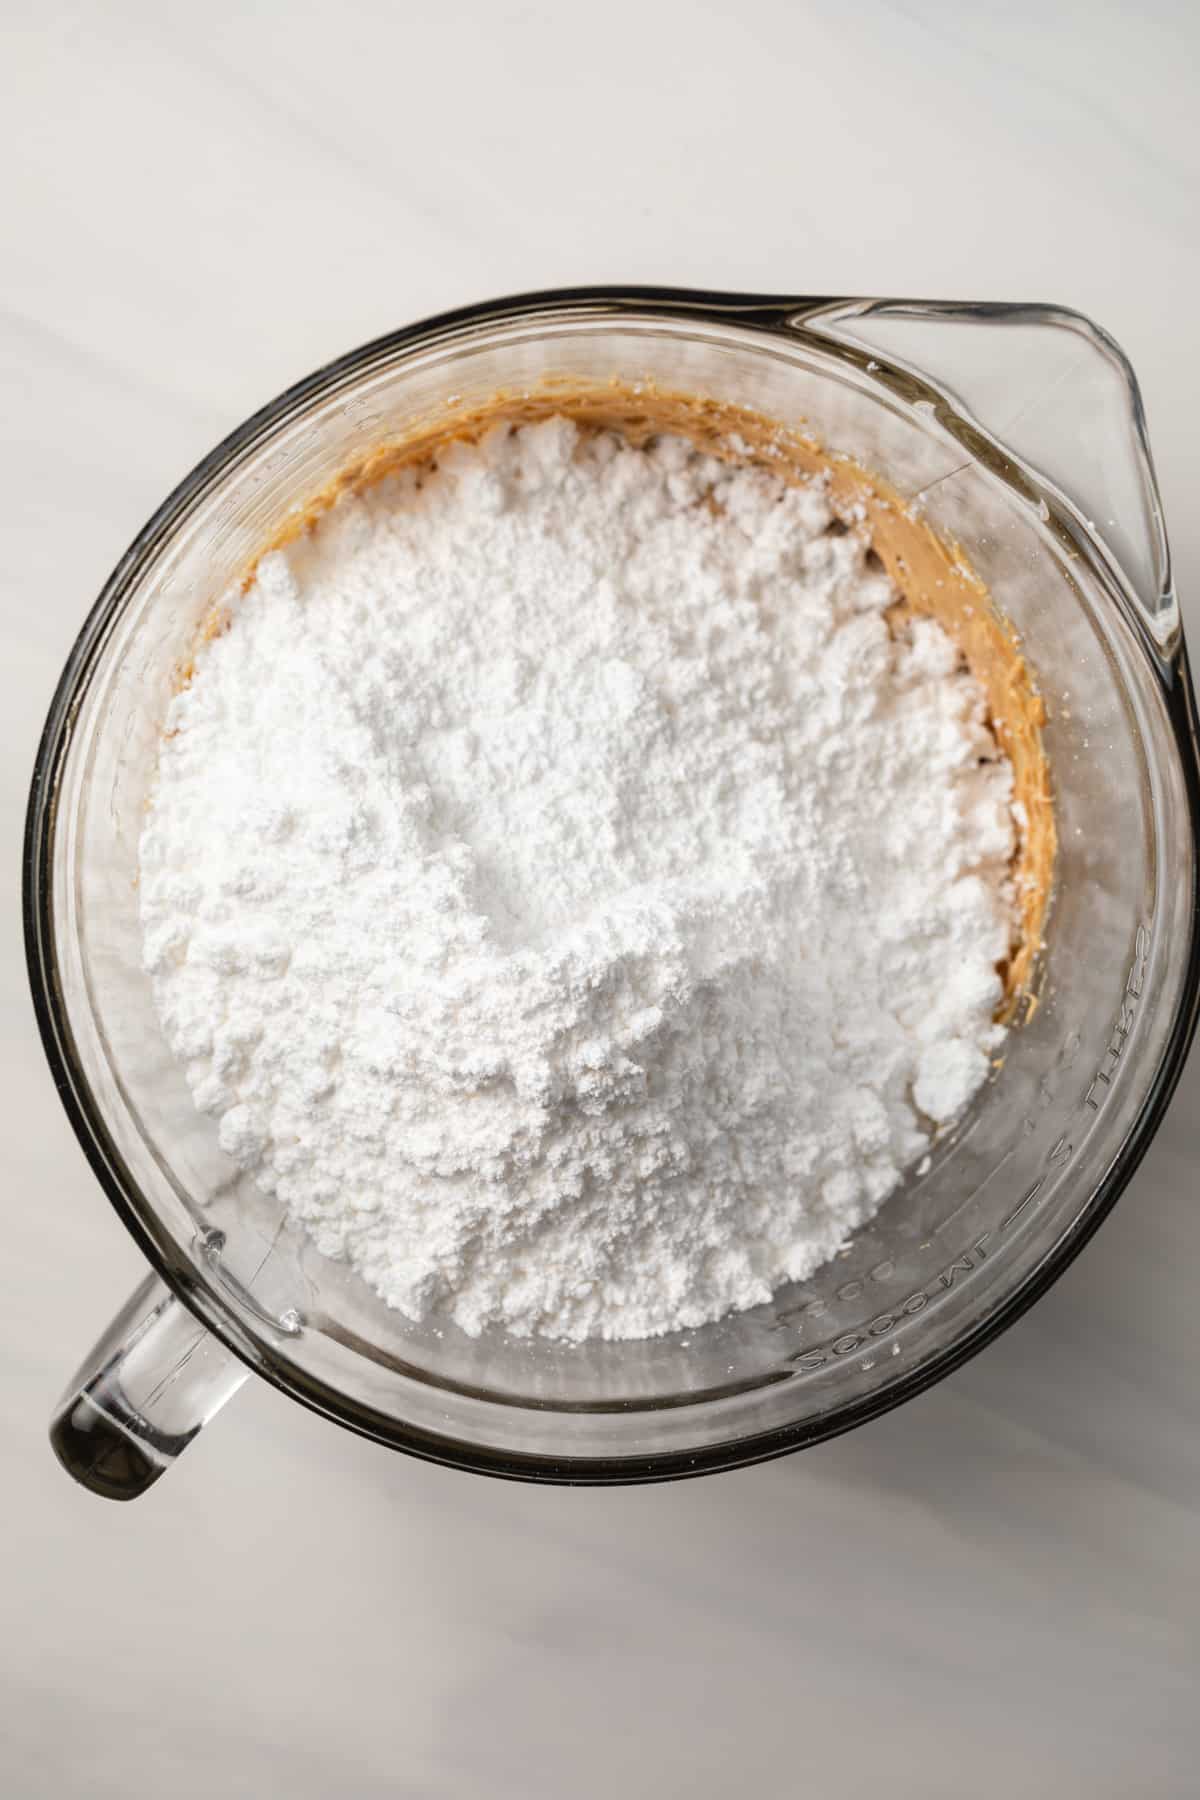 Powdered sugar added to peanut butter mixture.